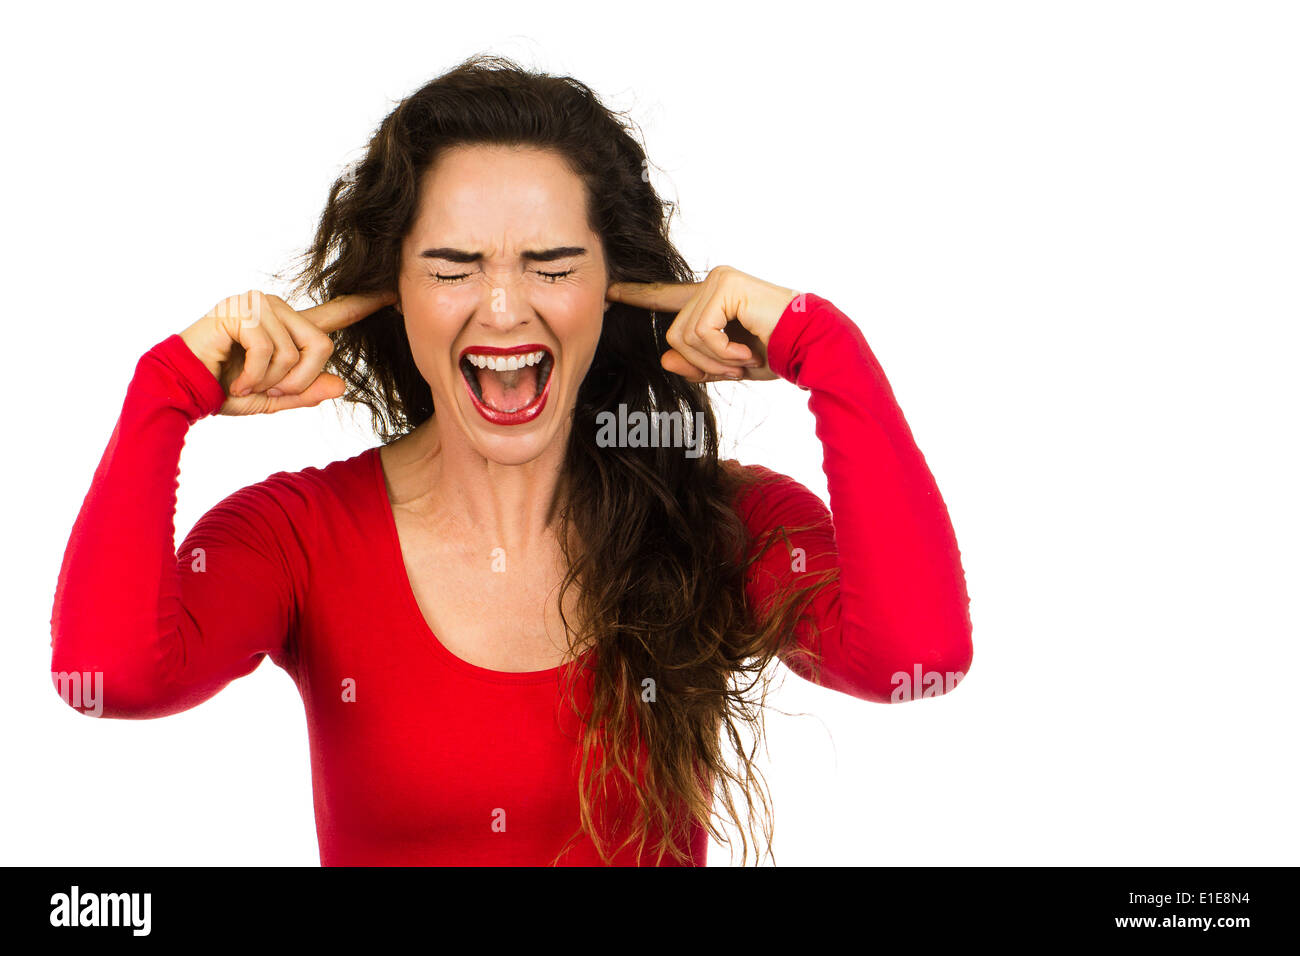 A very fed up and frustrated woman screaming and covering her ears. Isolated on white. Stock Photo